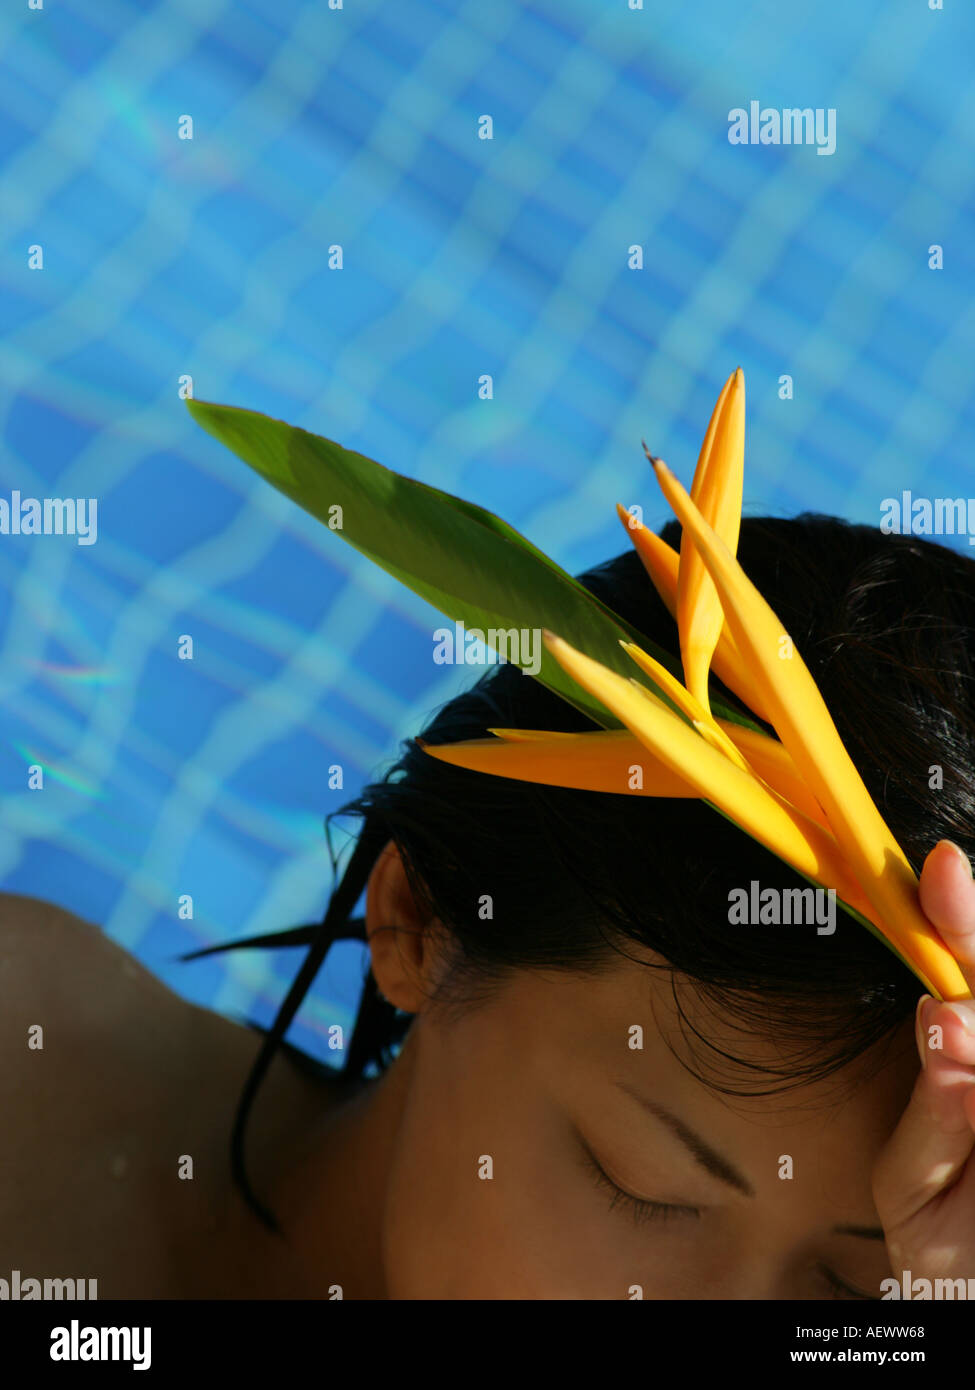 High angle view of a young woman holding a bird of paradise flower Caesalpinia gilliesii  Stock Photo